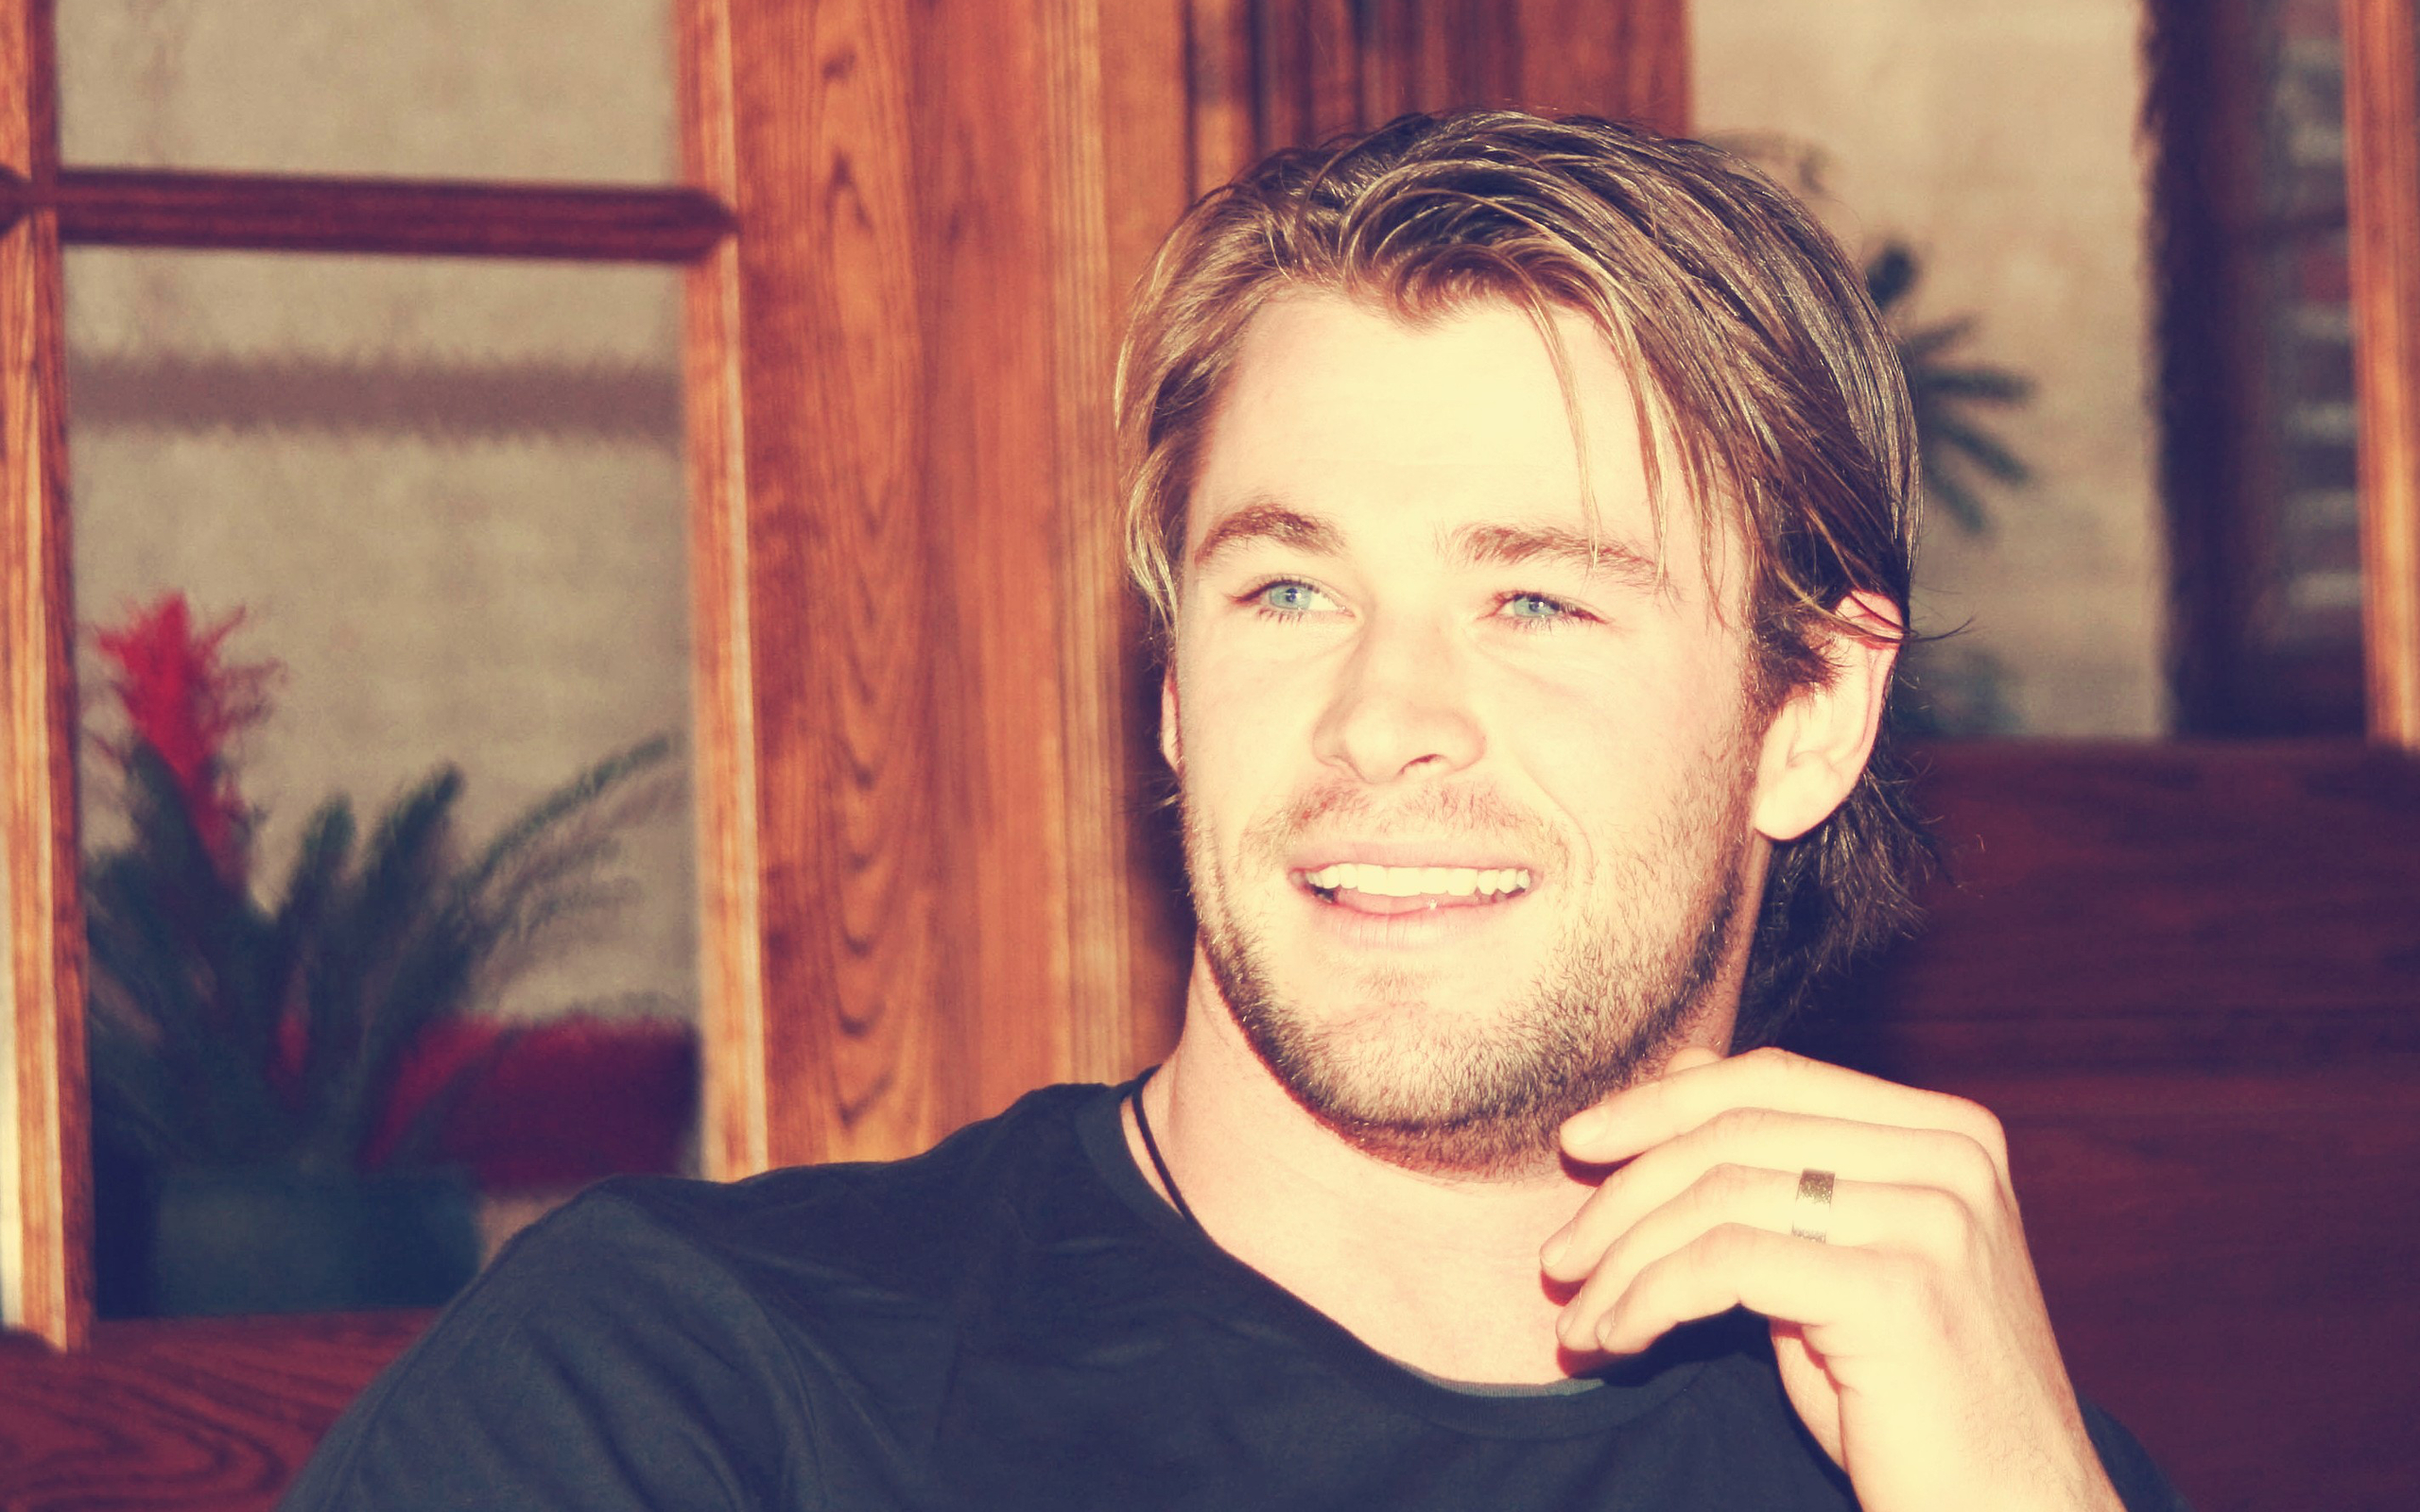 Chris Hemsworth Images Wallpaper, HD Celebrities 4K Wallpapers, Images,  Photos and Background - Wallpapers Den